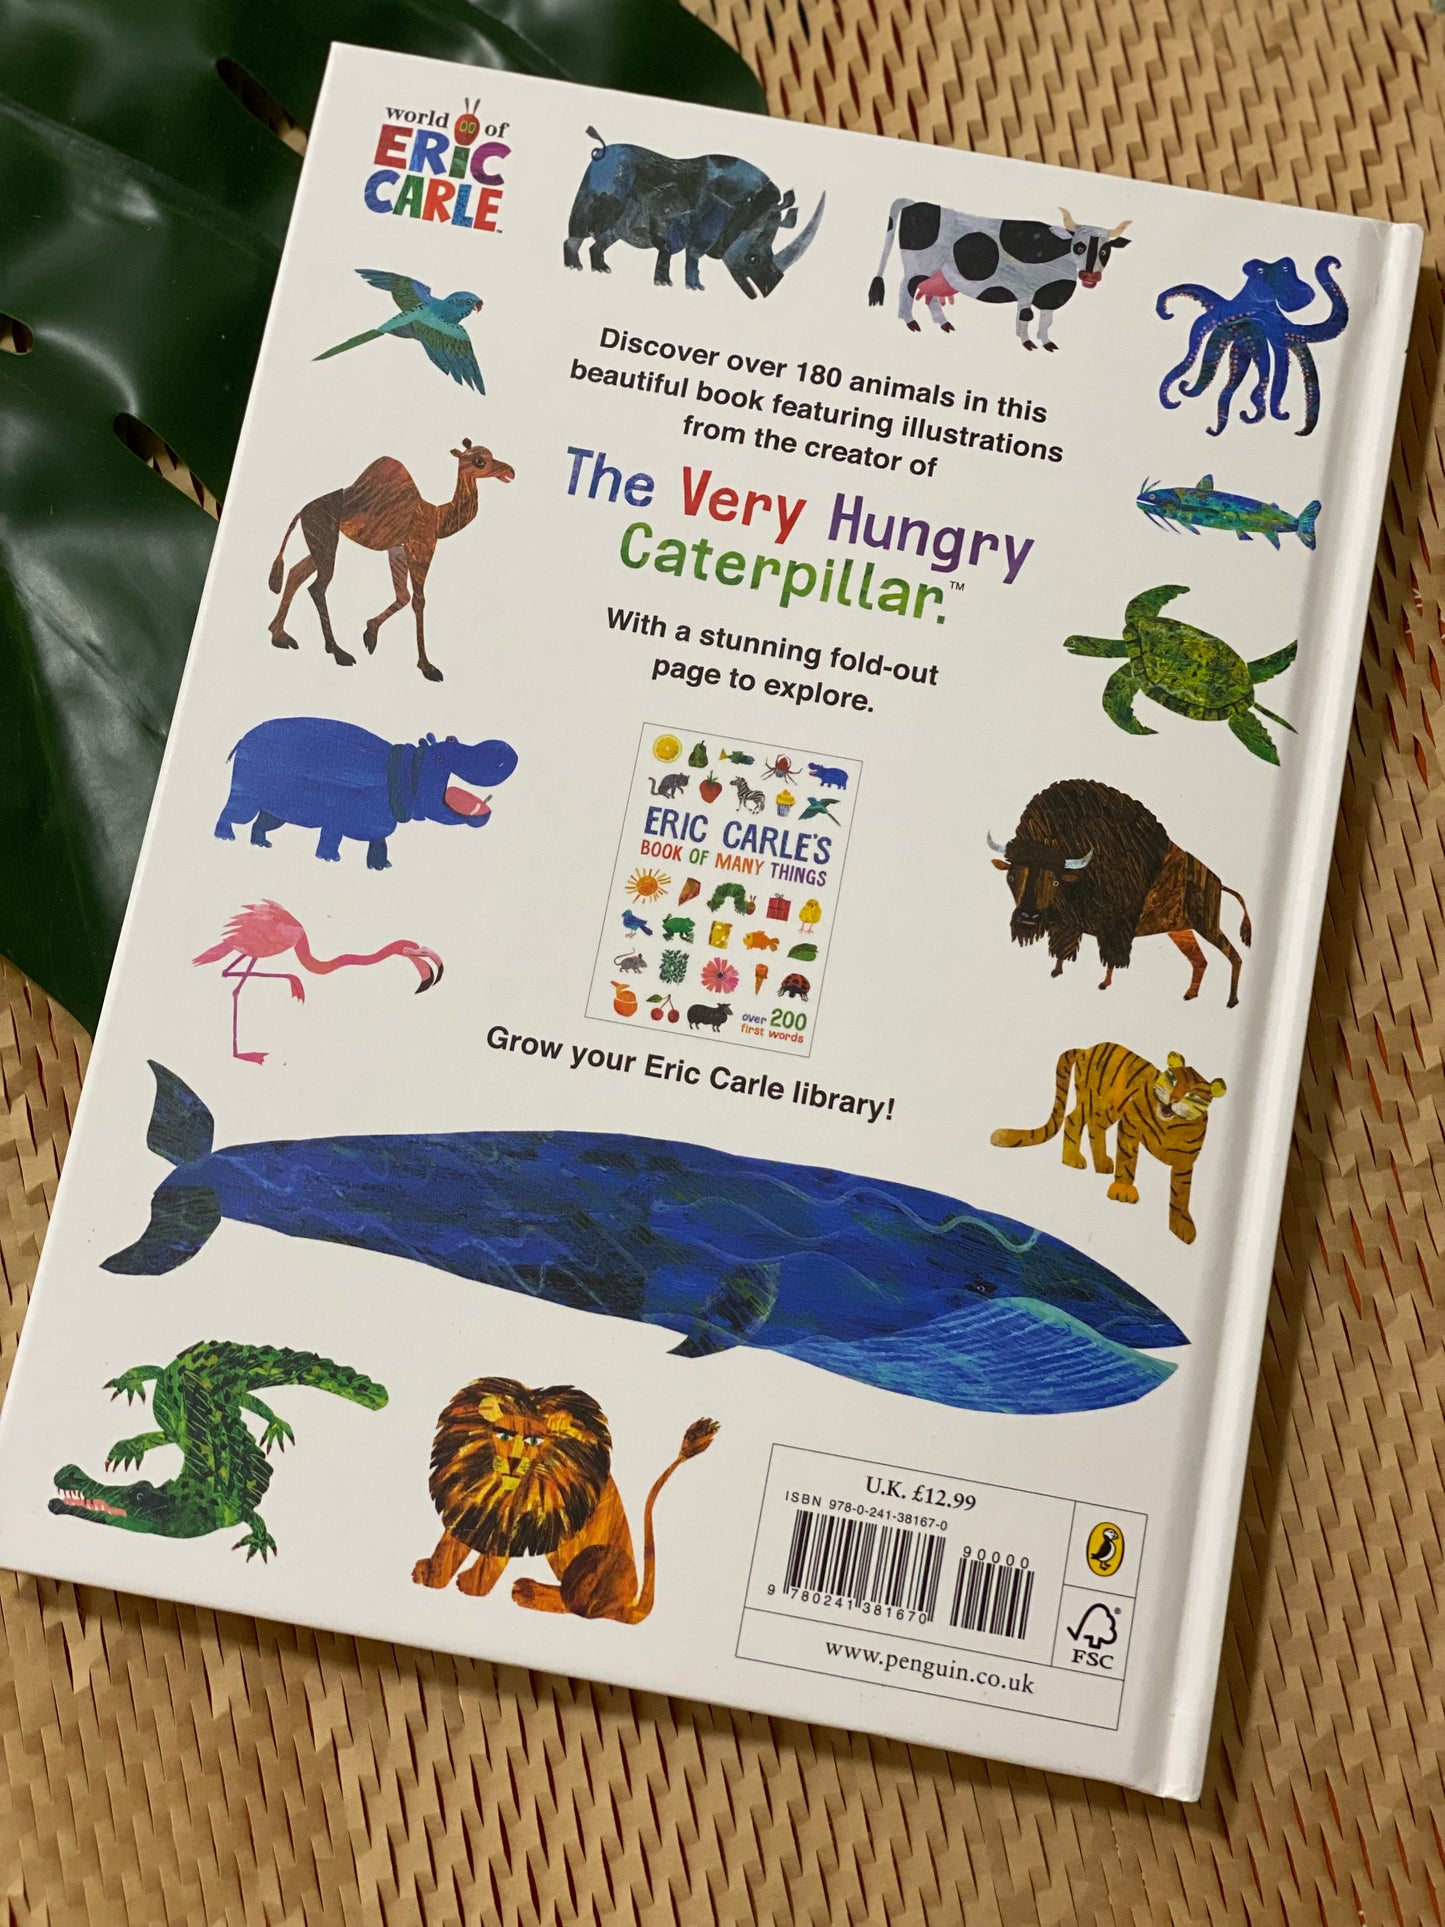 Eric Carle's Book of Many Things by Eric Carle